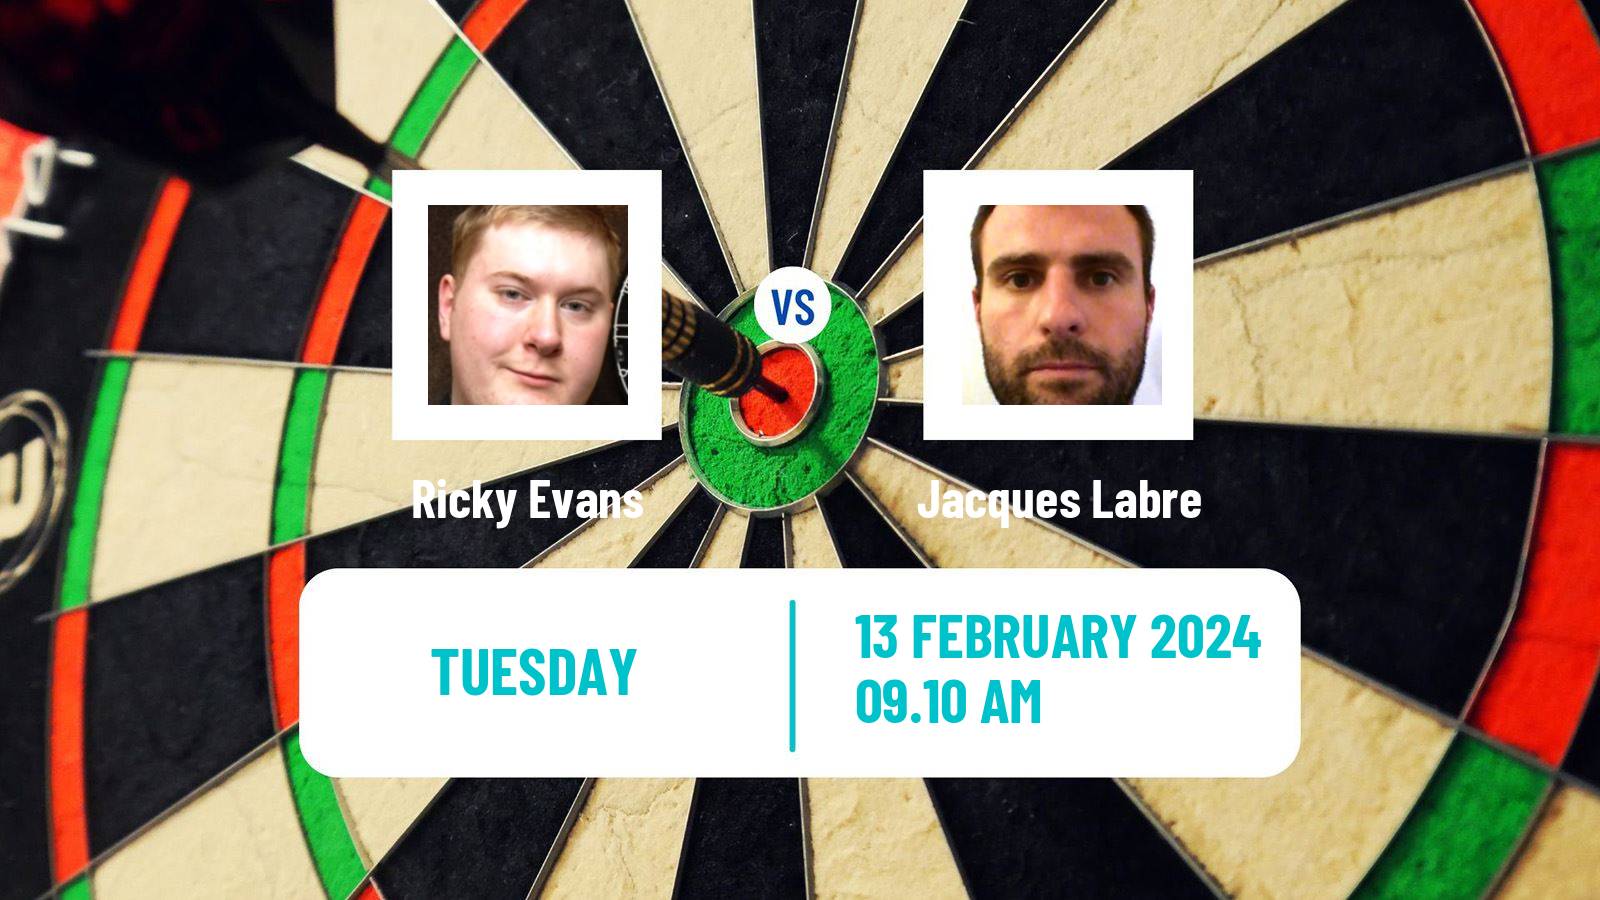 Darts Players Championship 2 Ricky Evans - Jacques Labre